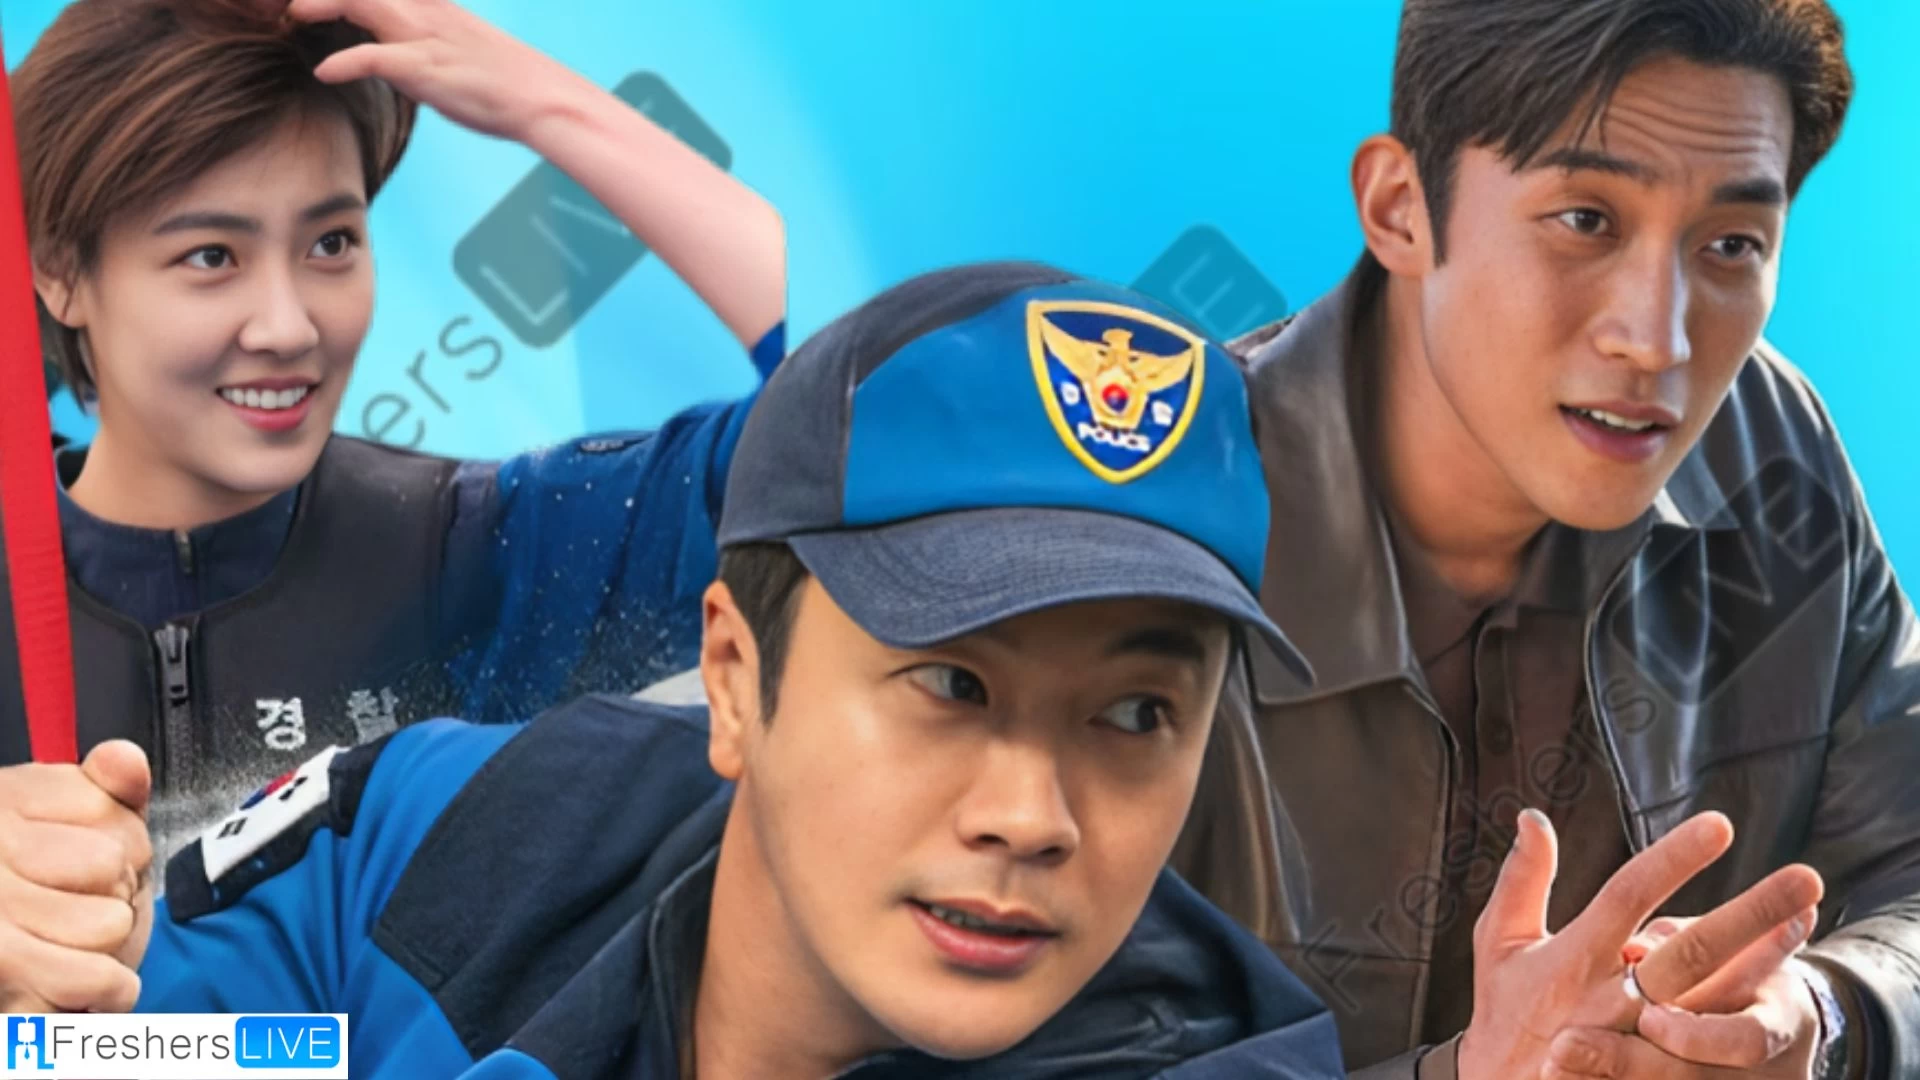 Han River Police Season 1 Episode 6 Release Date and Time, Countdown, When is it Coming Out?